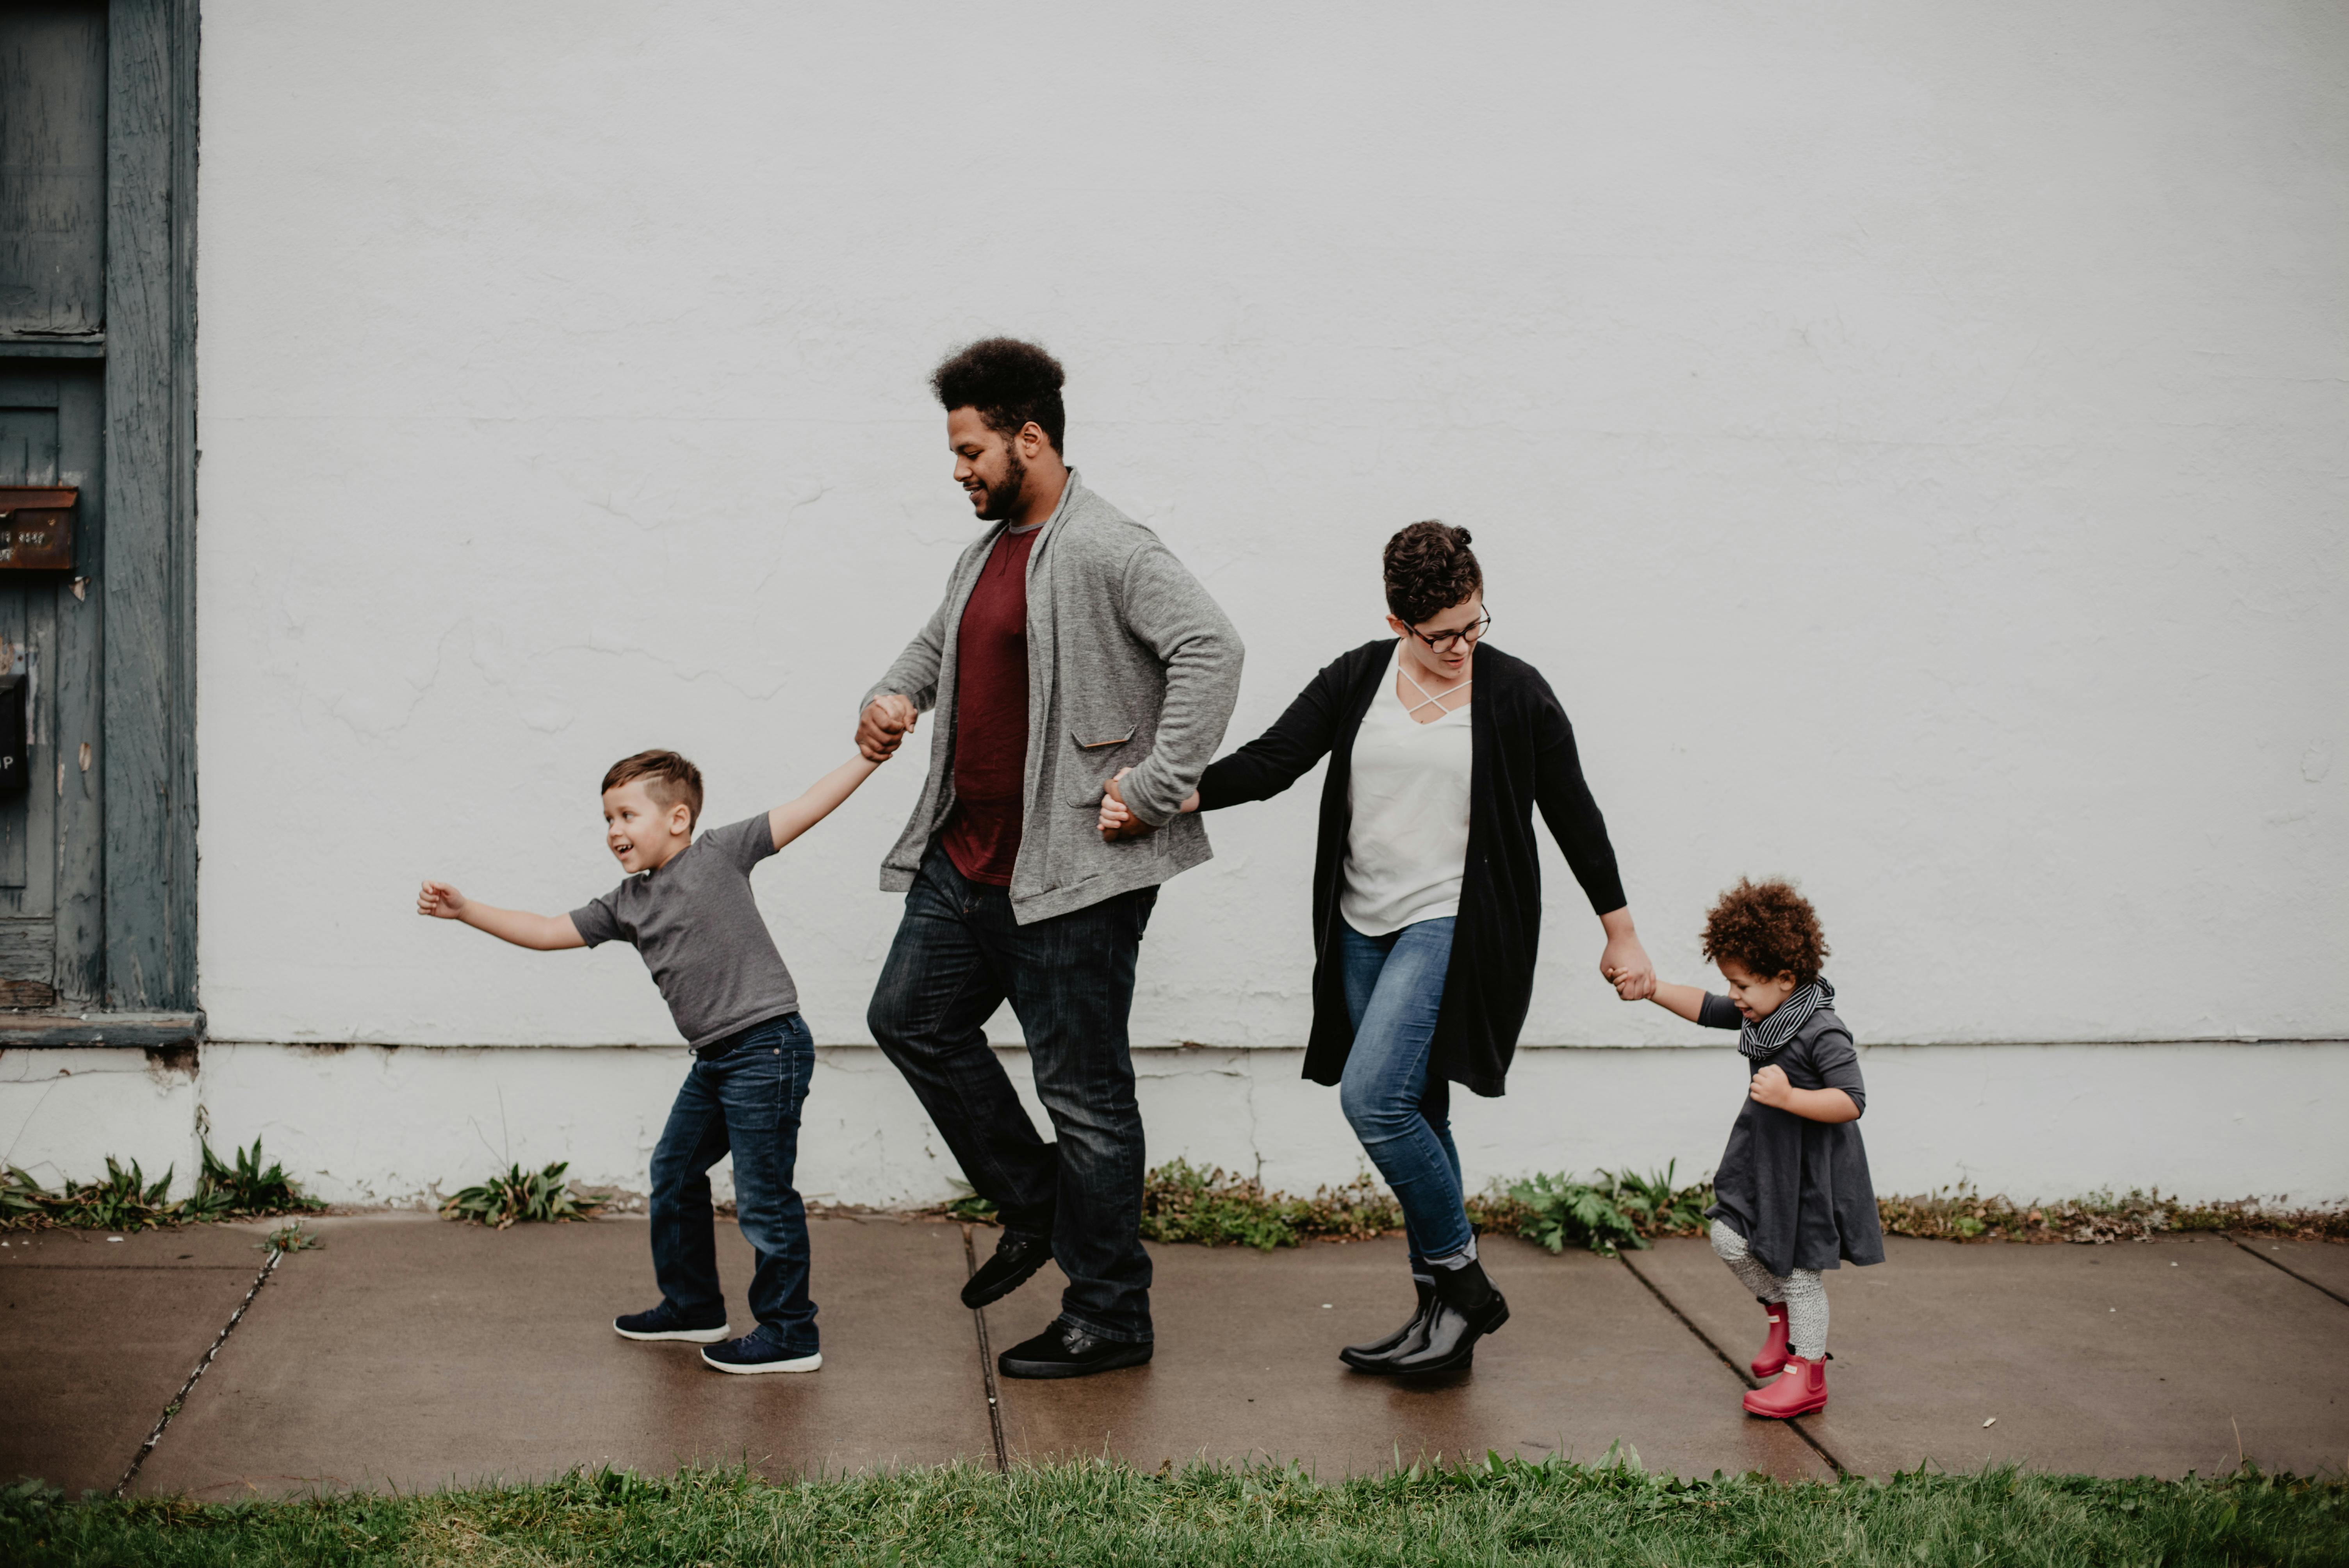 Family walks on a rainy day | Source: Pexels